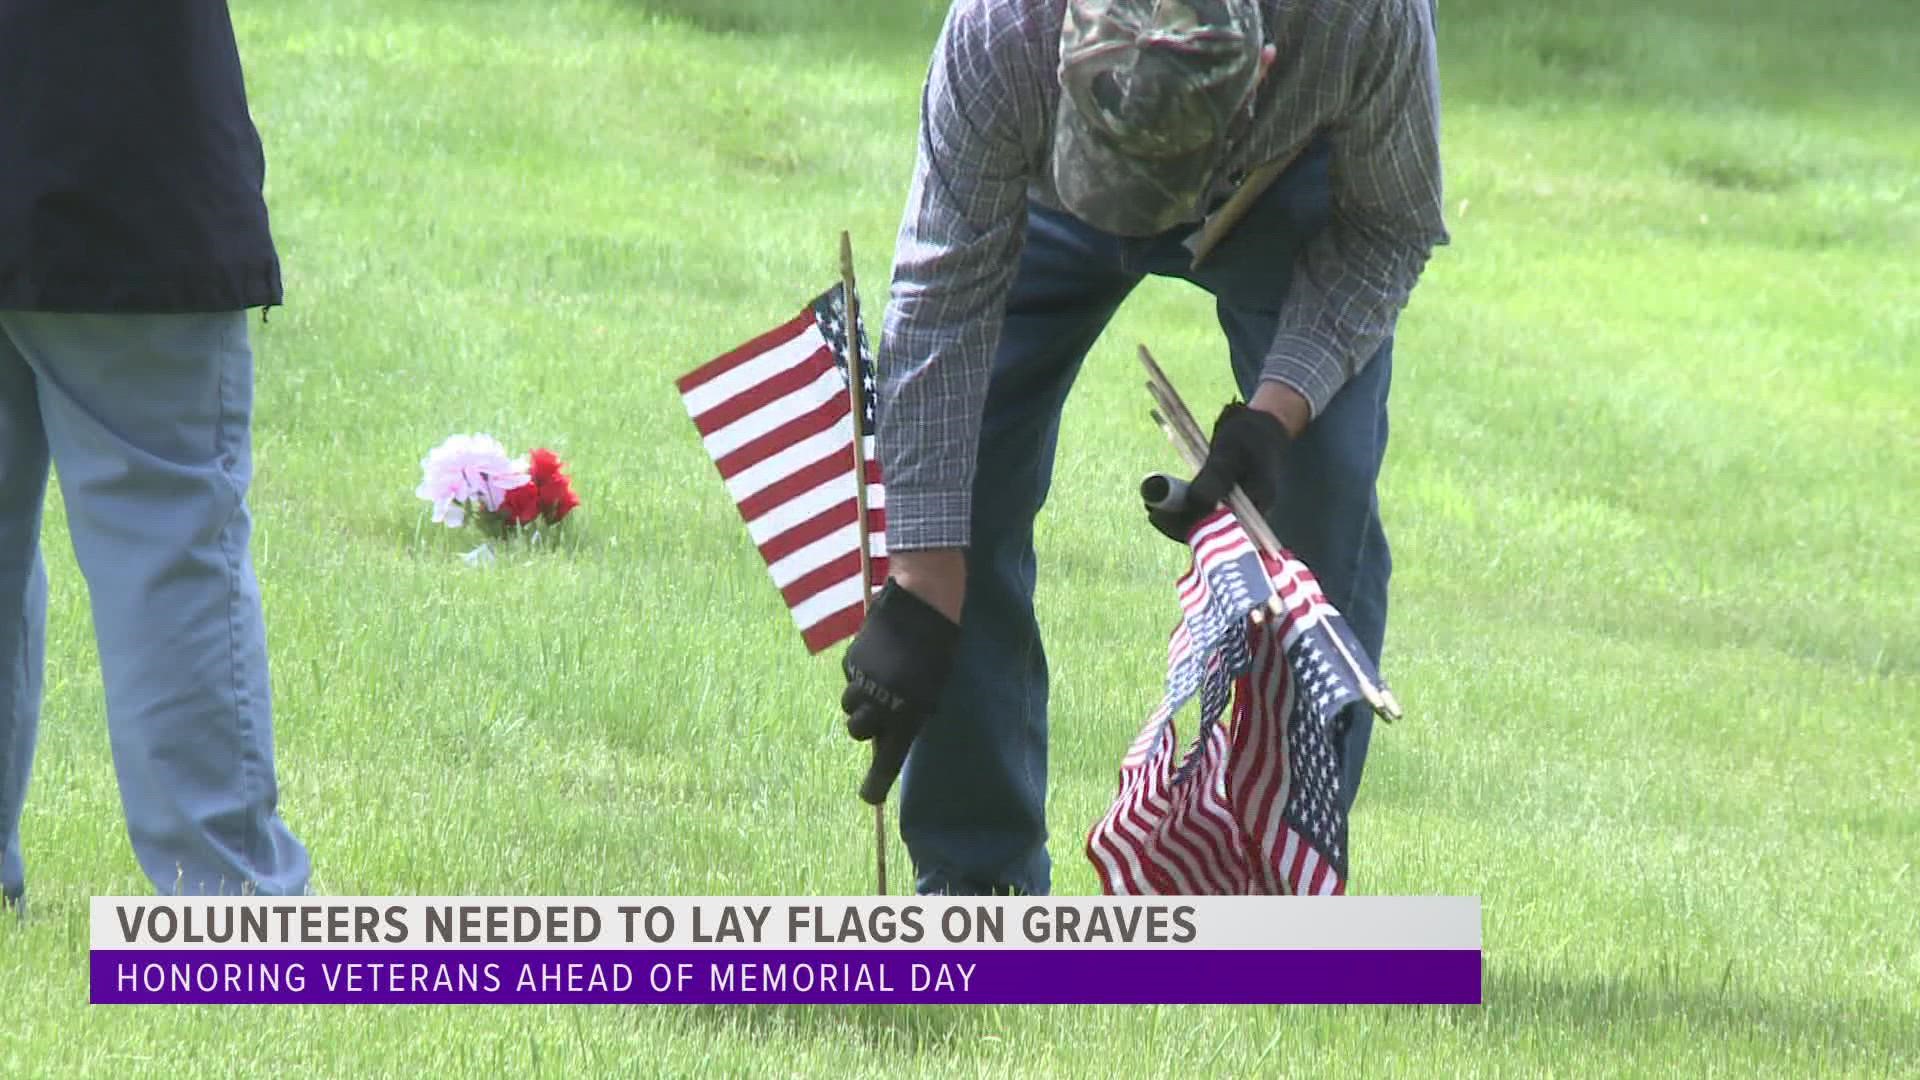 Memorial Day is one week from today and a local American Legion Post is asking for volunteers to help place flags on veterans' graves.